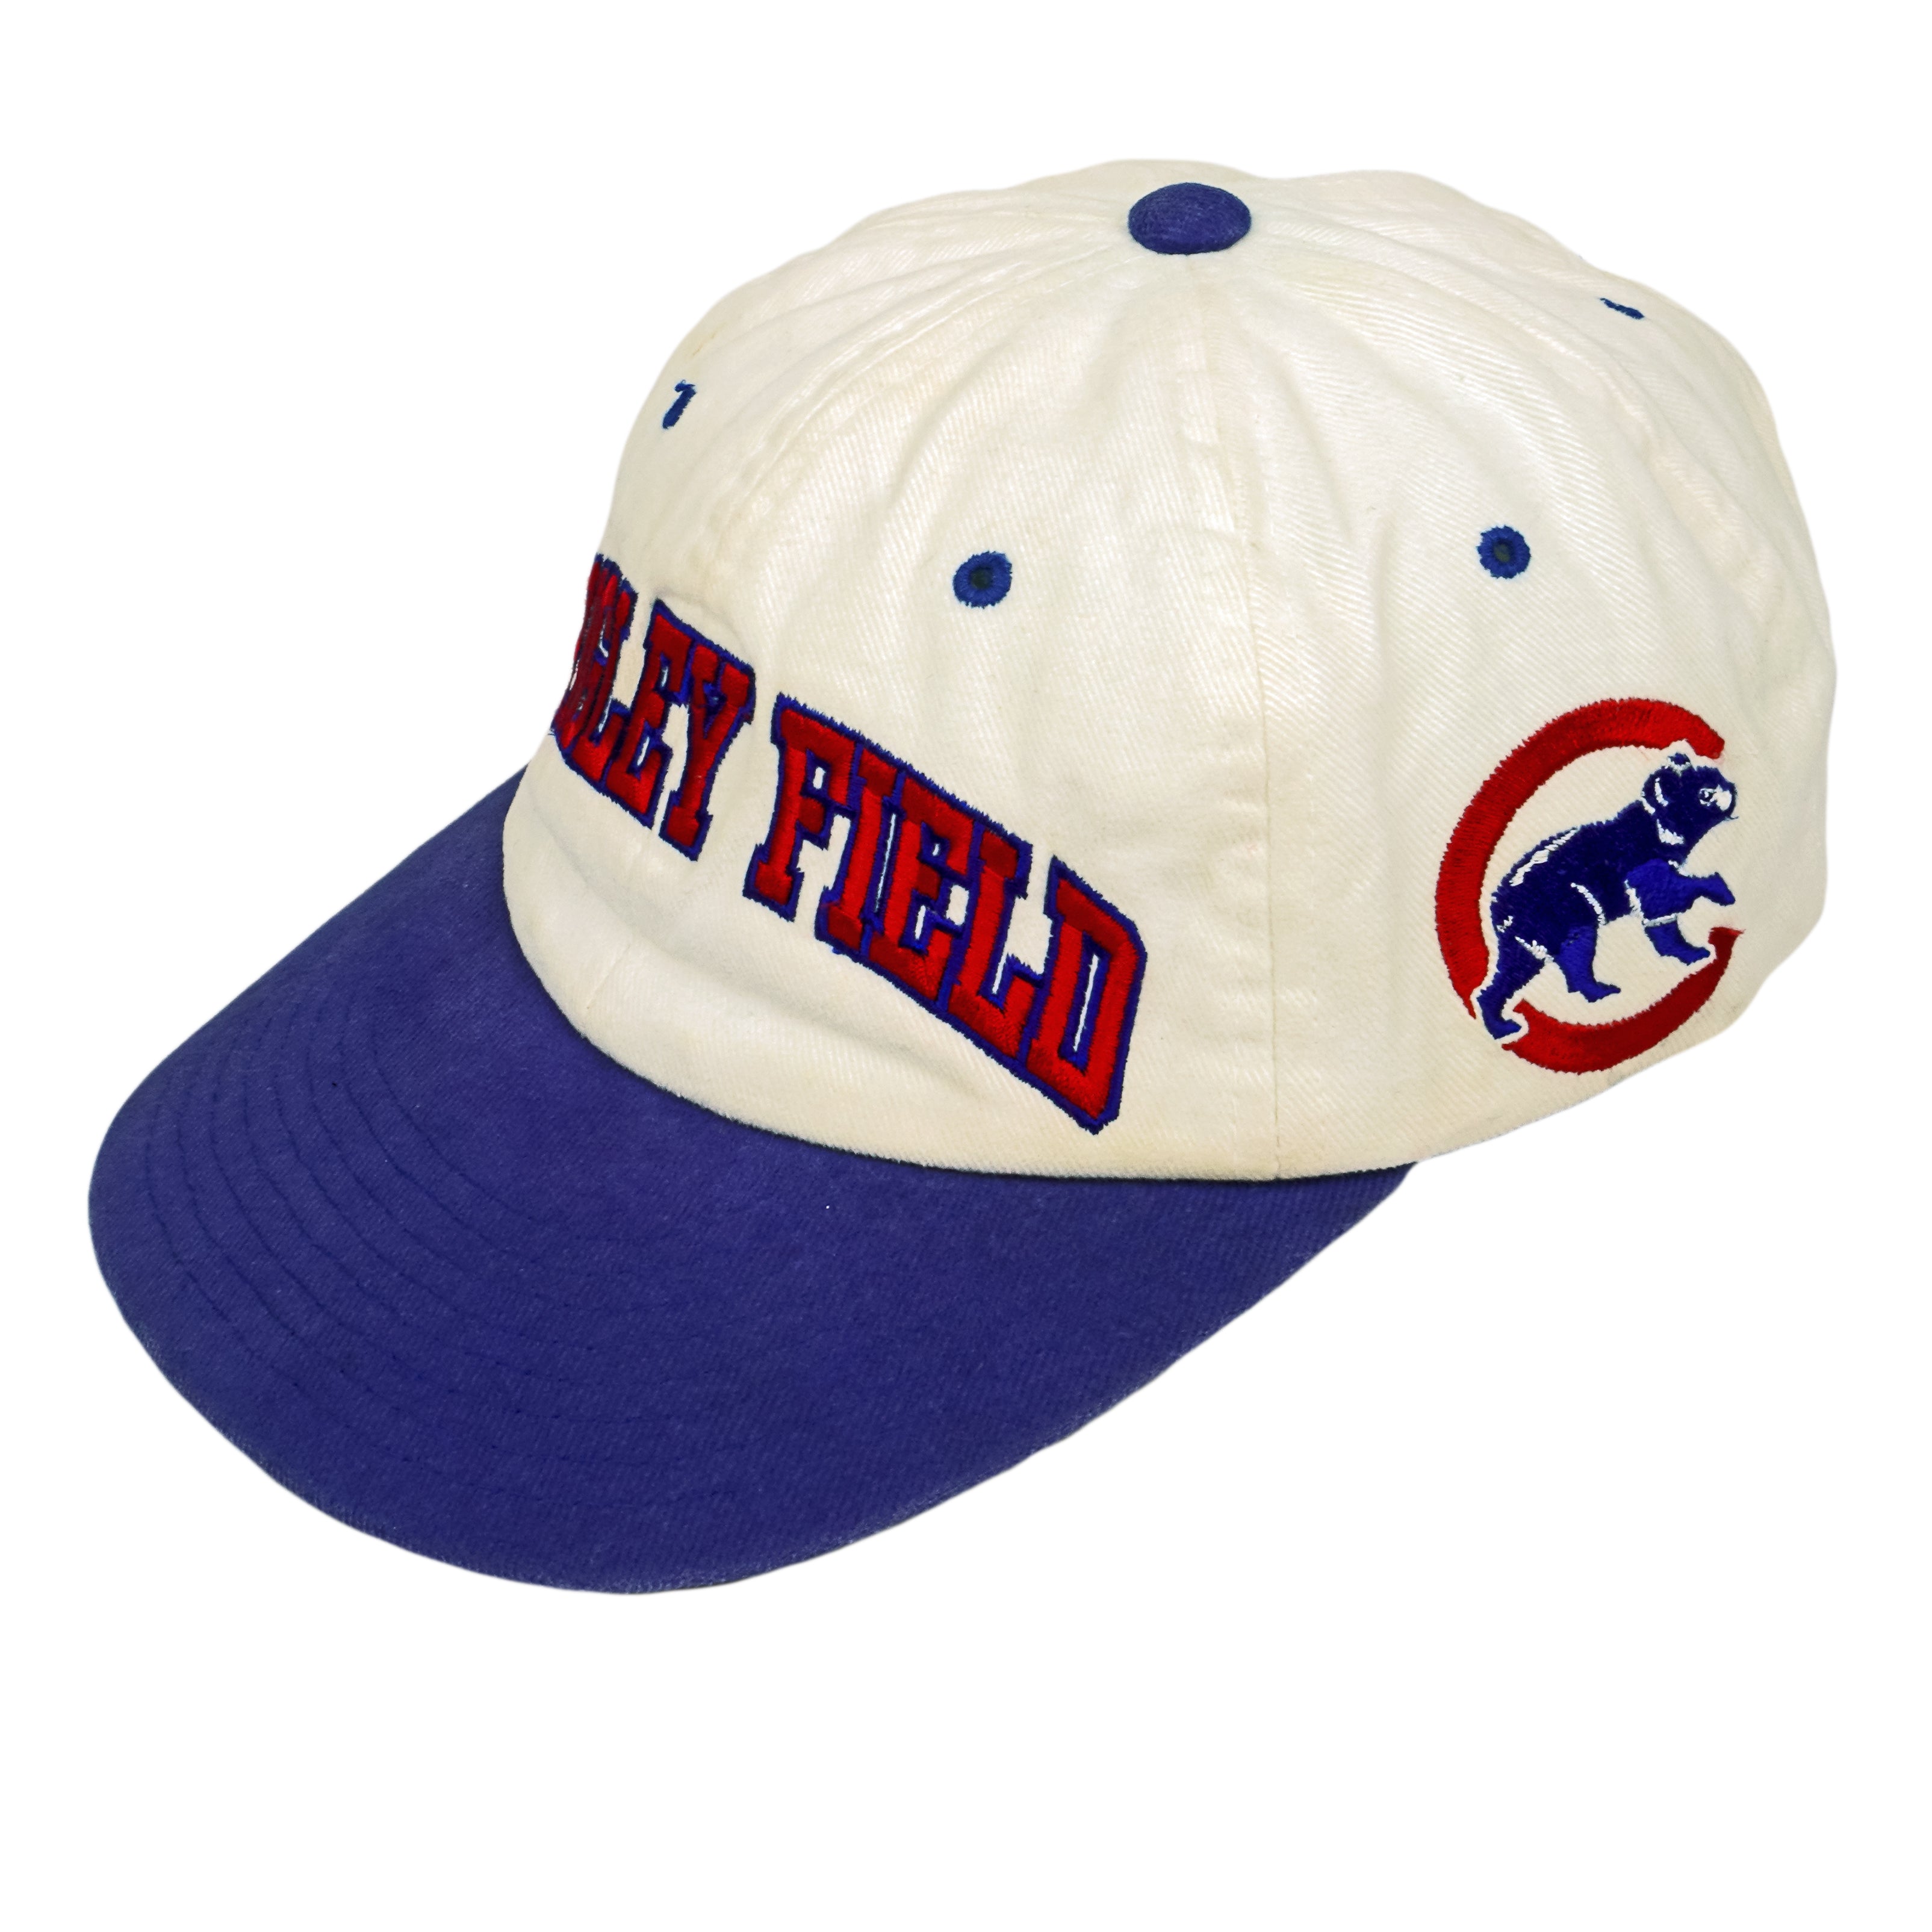 Vintage Starter - Chicago Cubs Wrigley Field Embroidered Snapback Hat 1990s  OSFA – Vintage Club Clothing